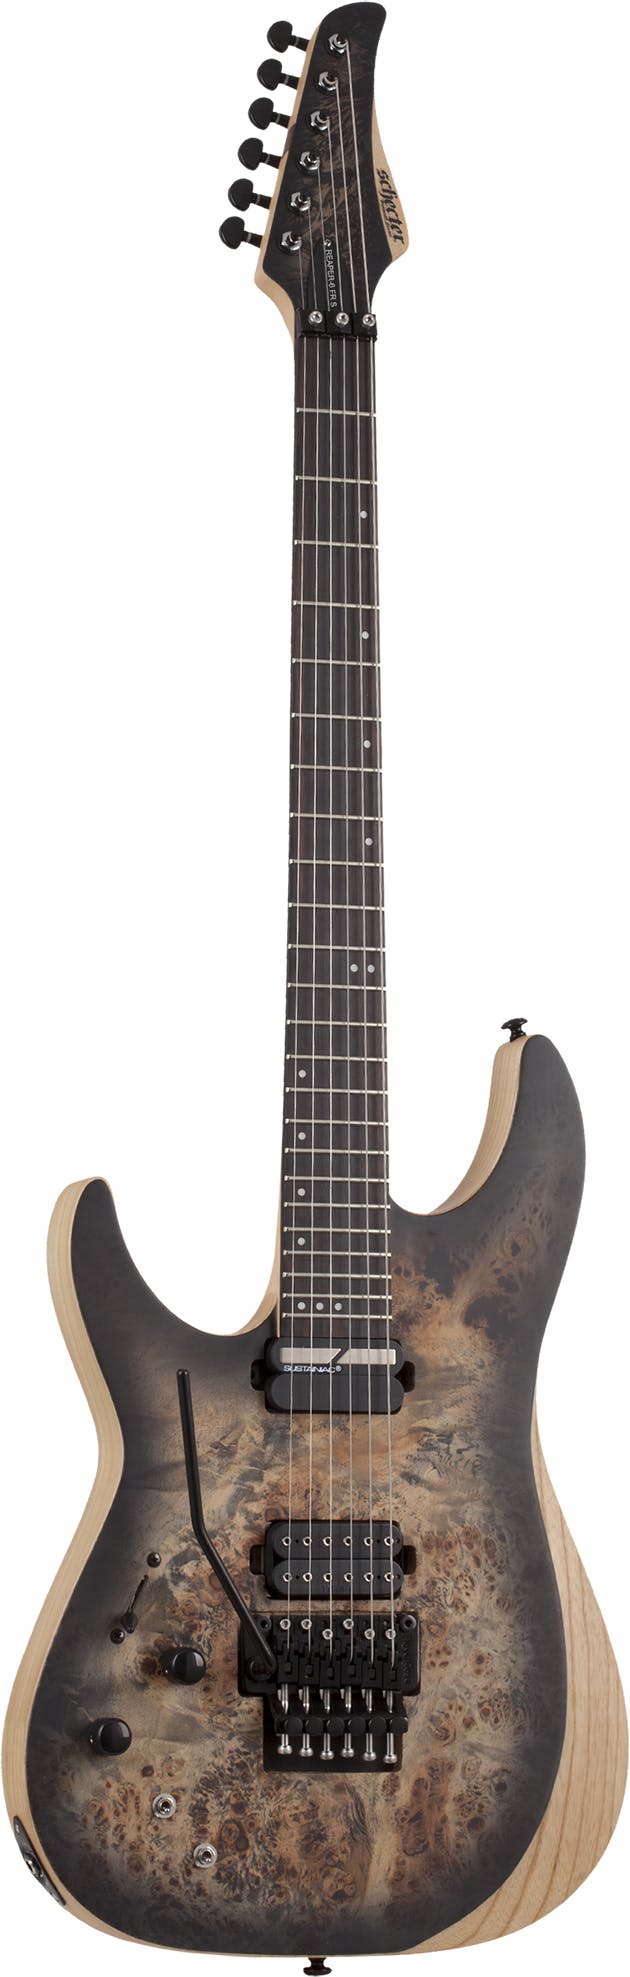 Schecter Reaper-6 FR S LH in Charcoal Burst - Andertons Music Co.